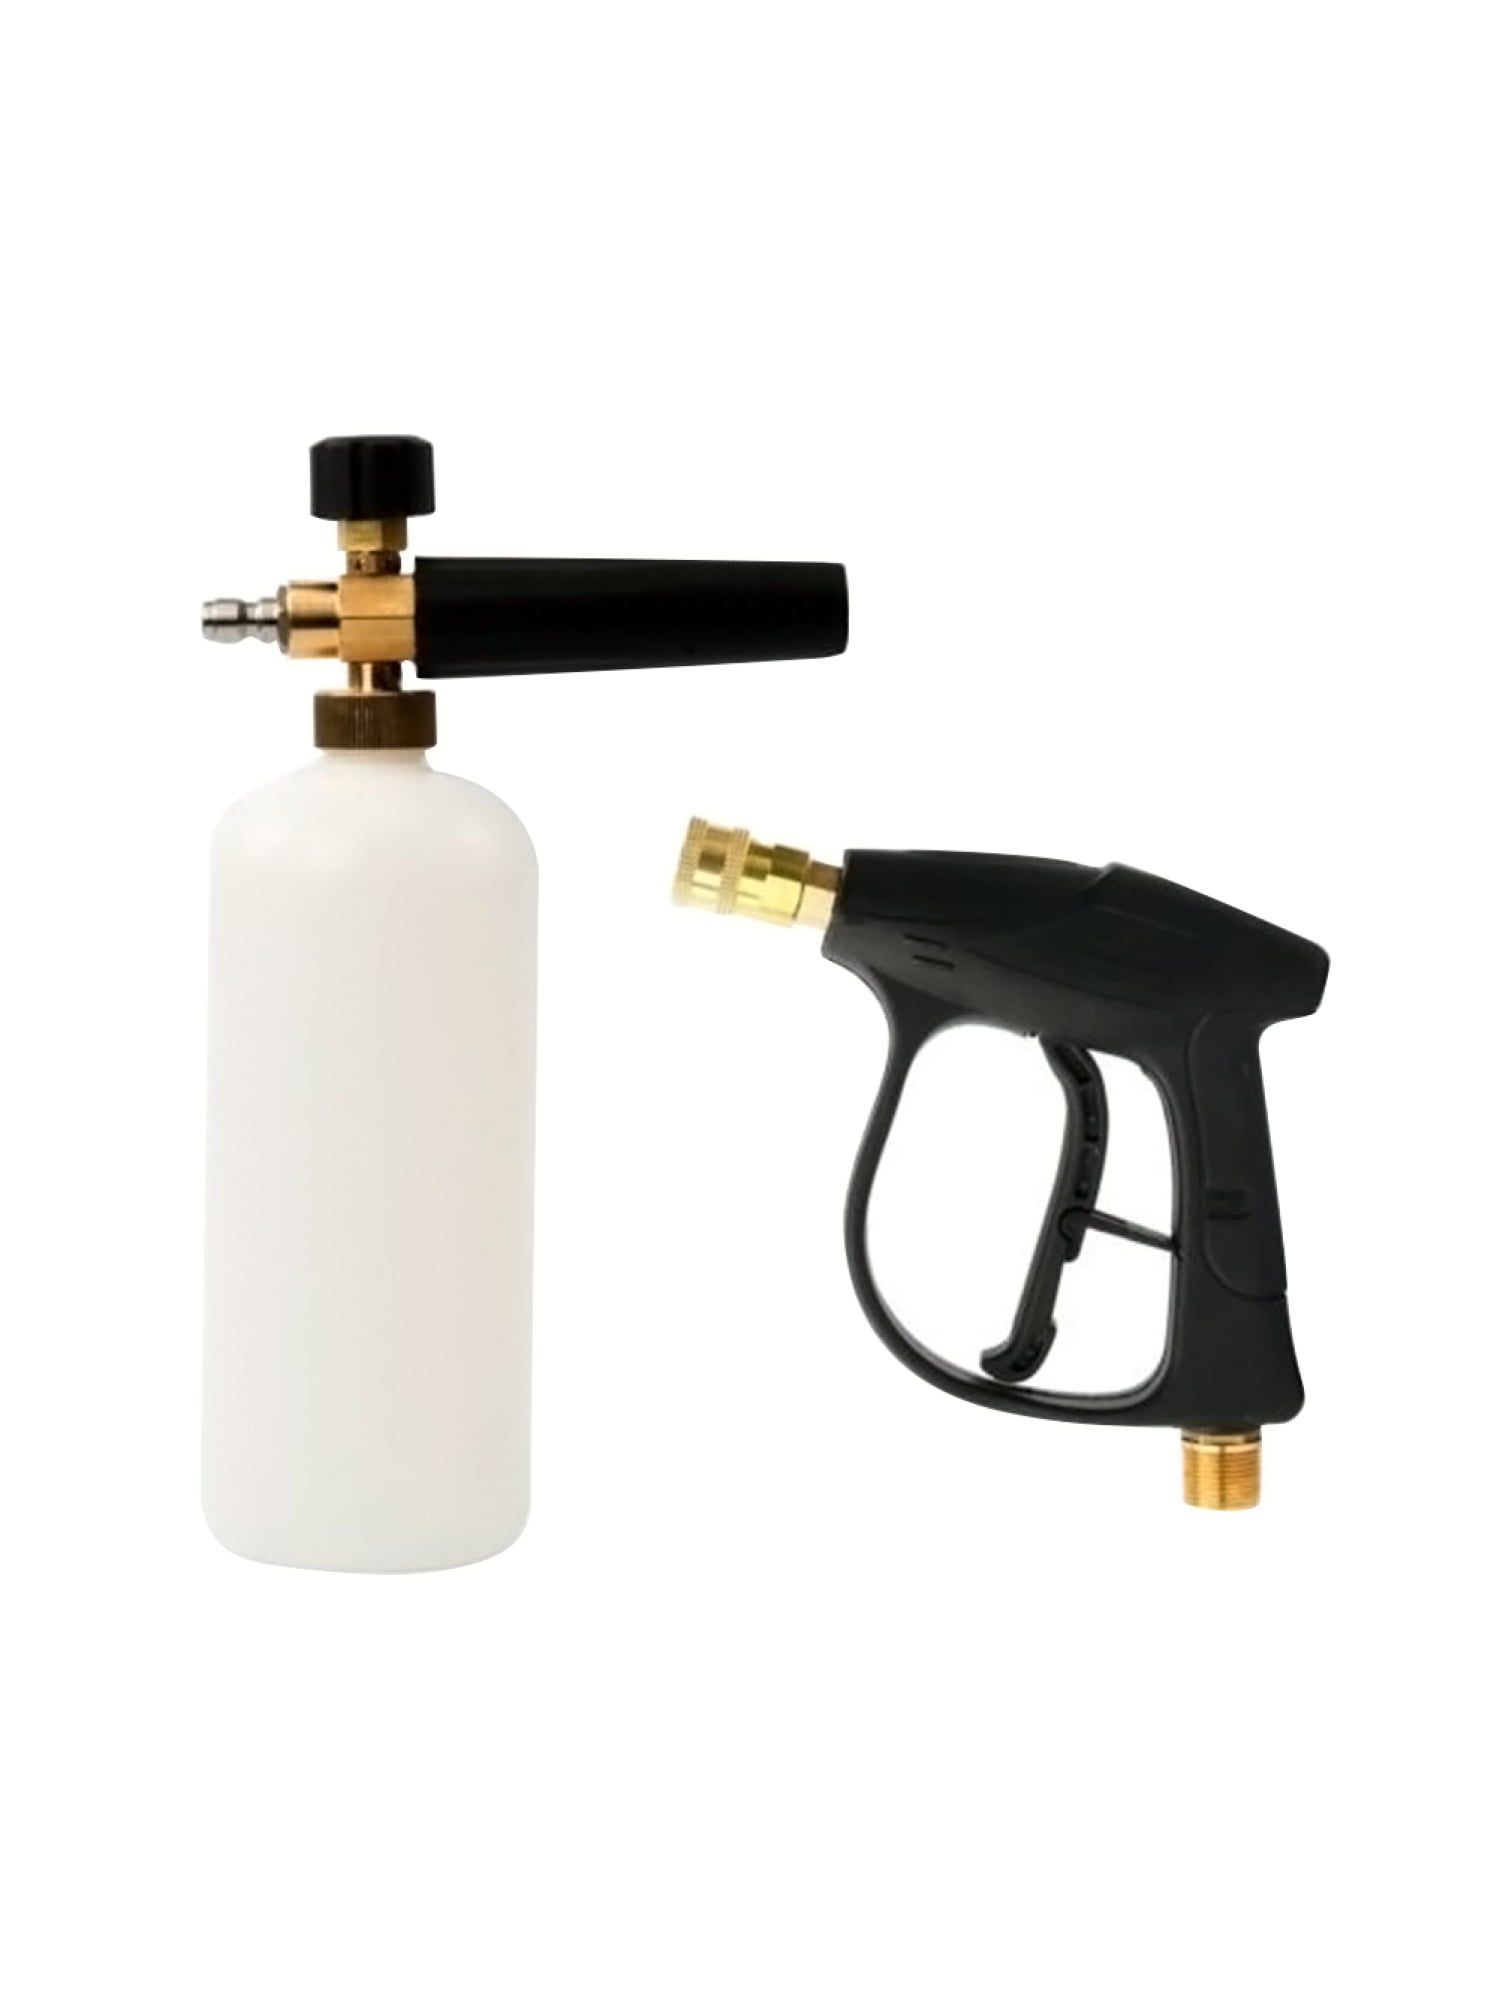 Pressure Washer Compact Quick Release Gun Lance and Snow Foam Lance Set 